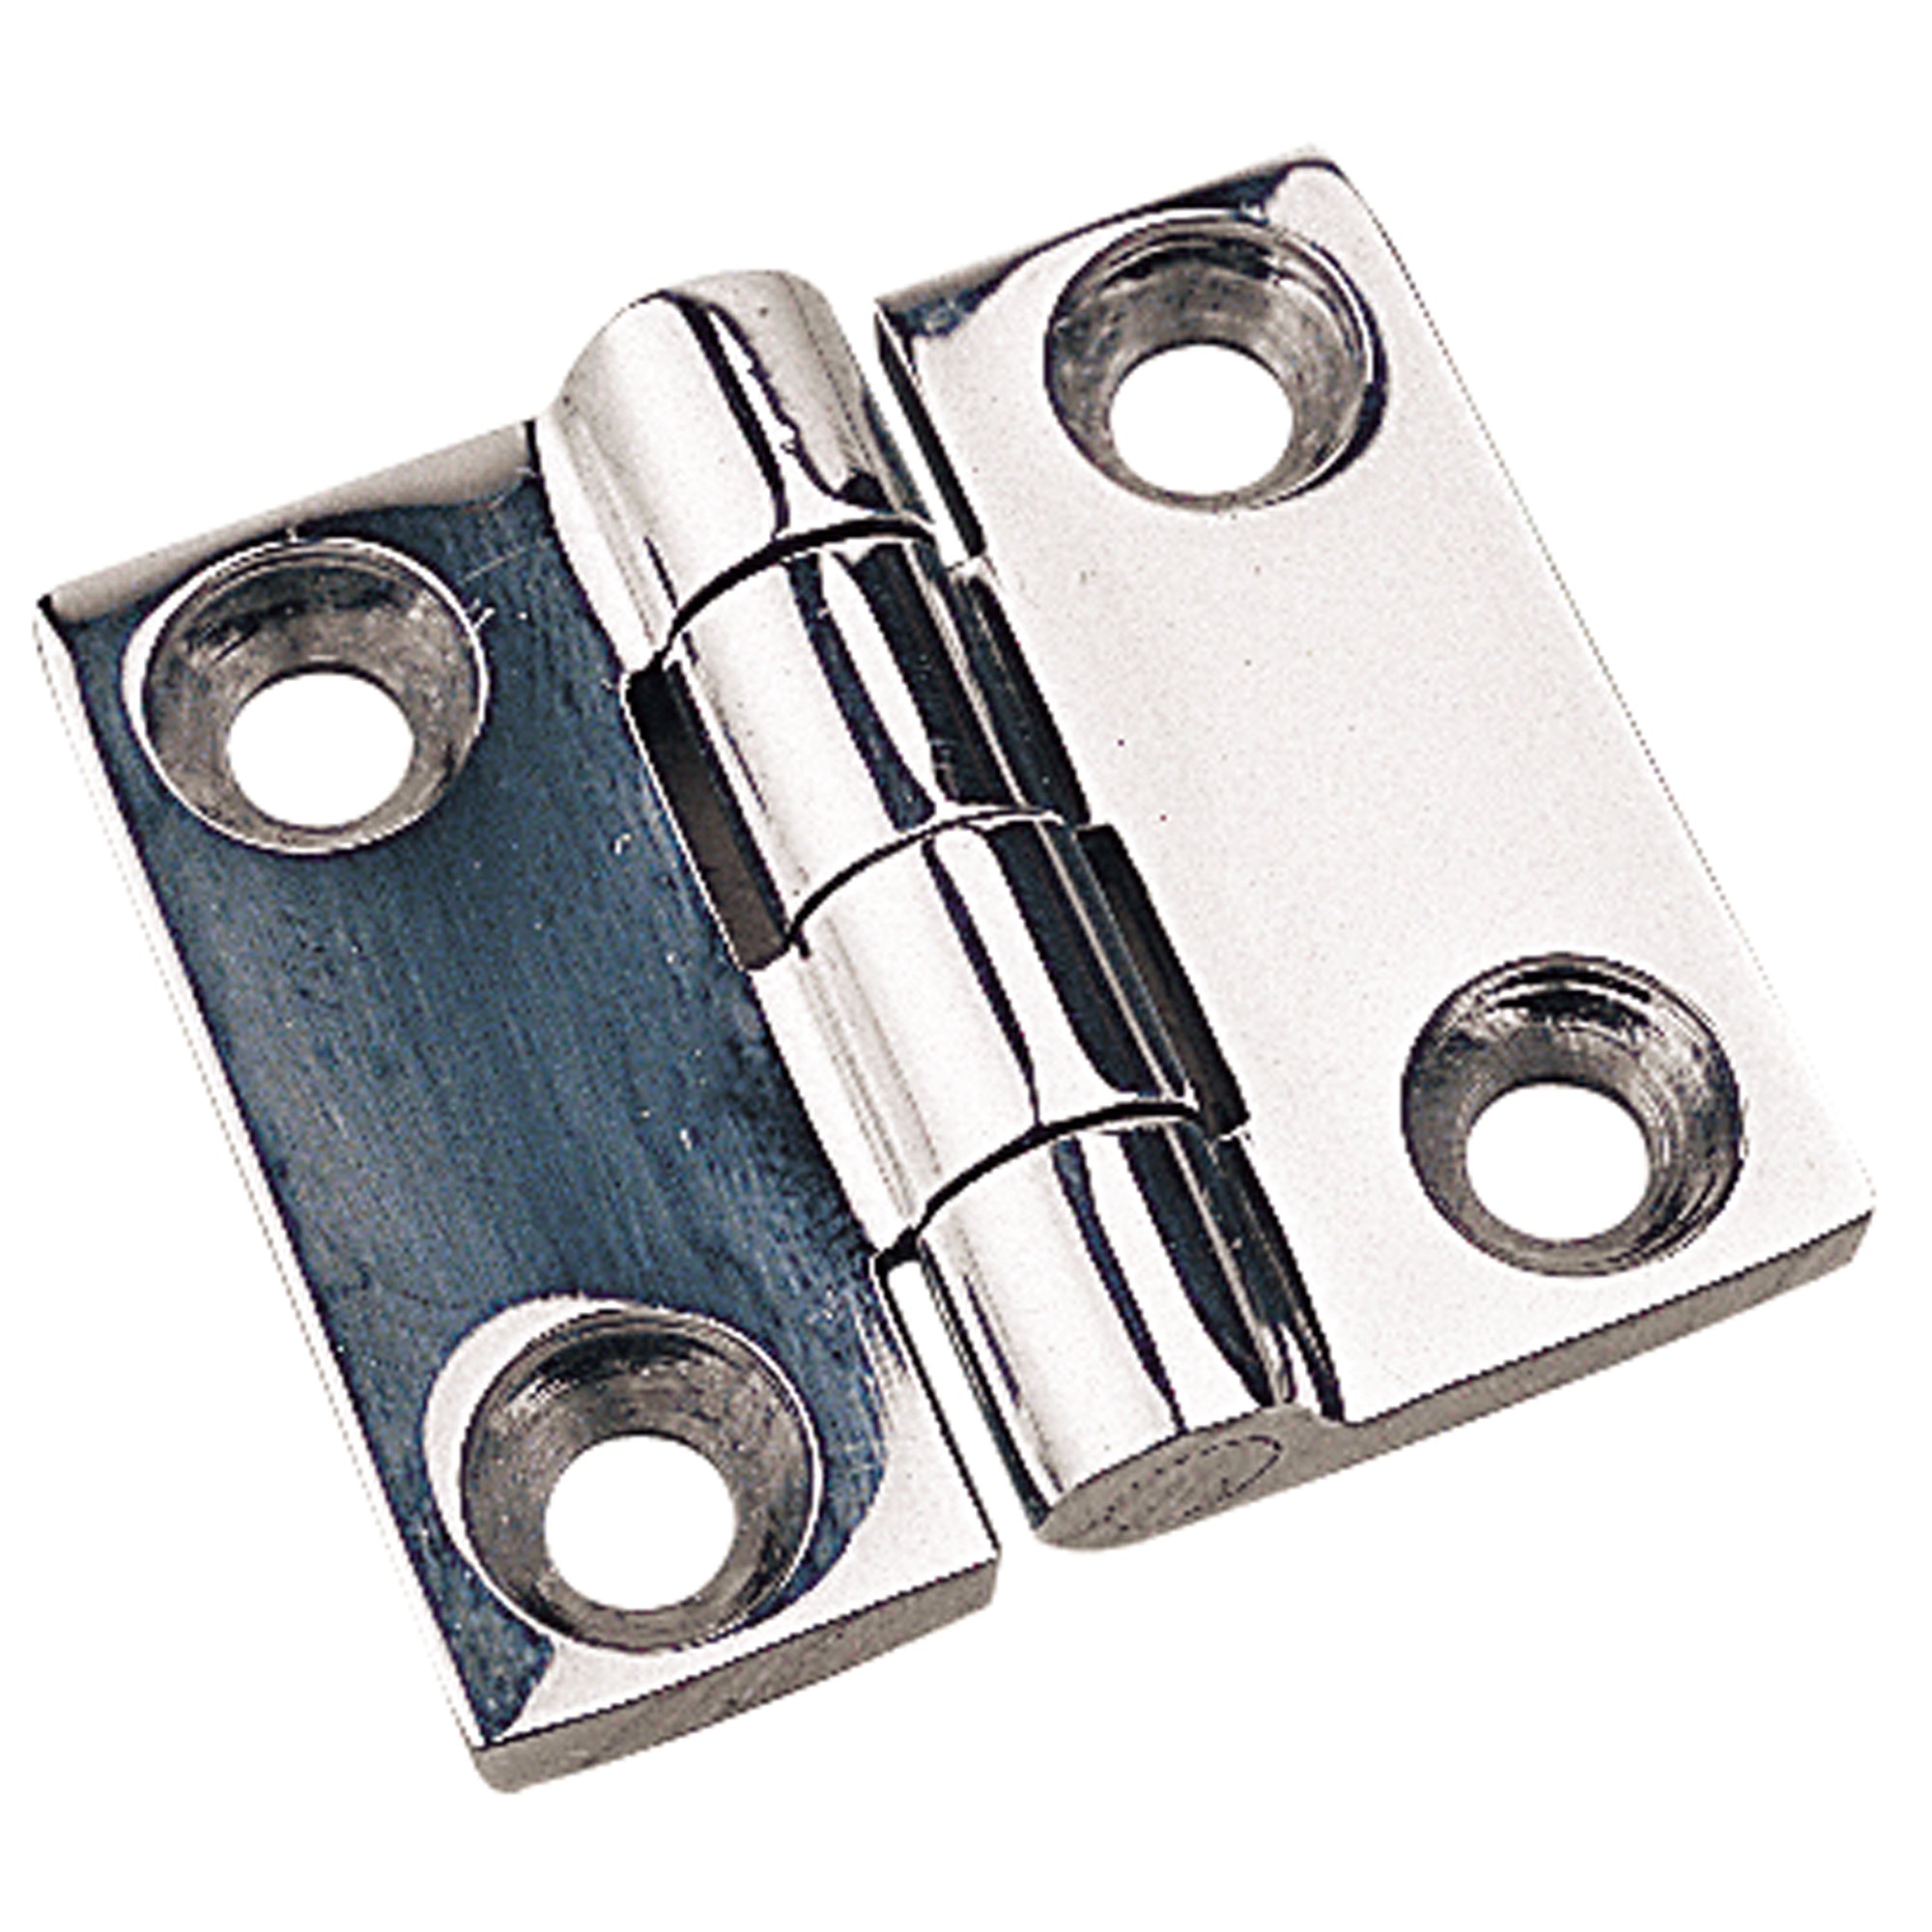 Sea-Dog 205140-1 Stainless Steel Butt Hinge - 1-5/8" x 1-1/2"